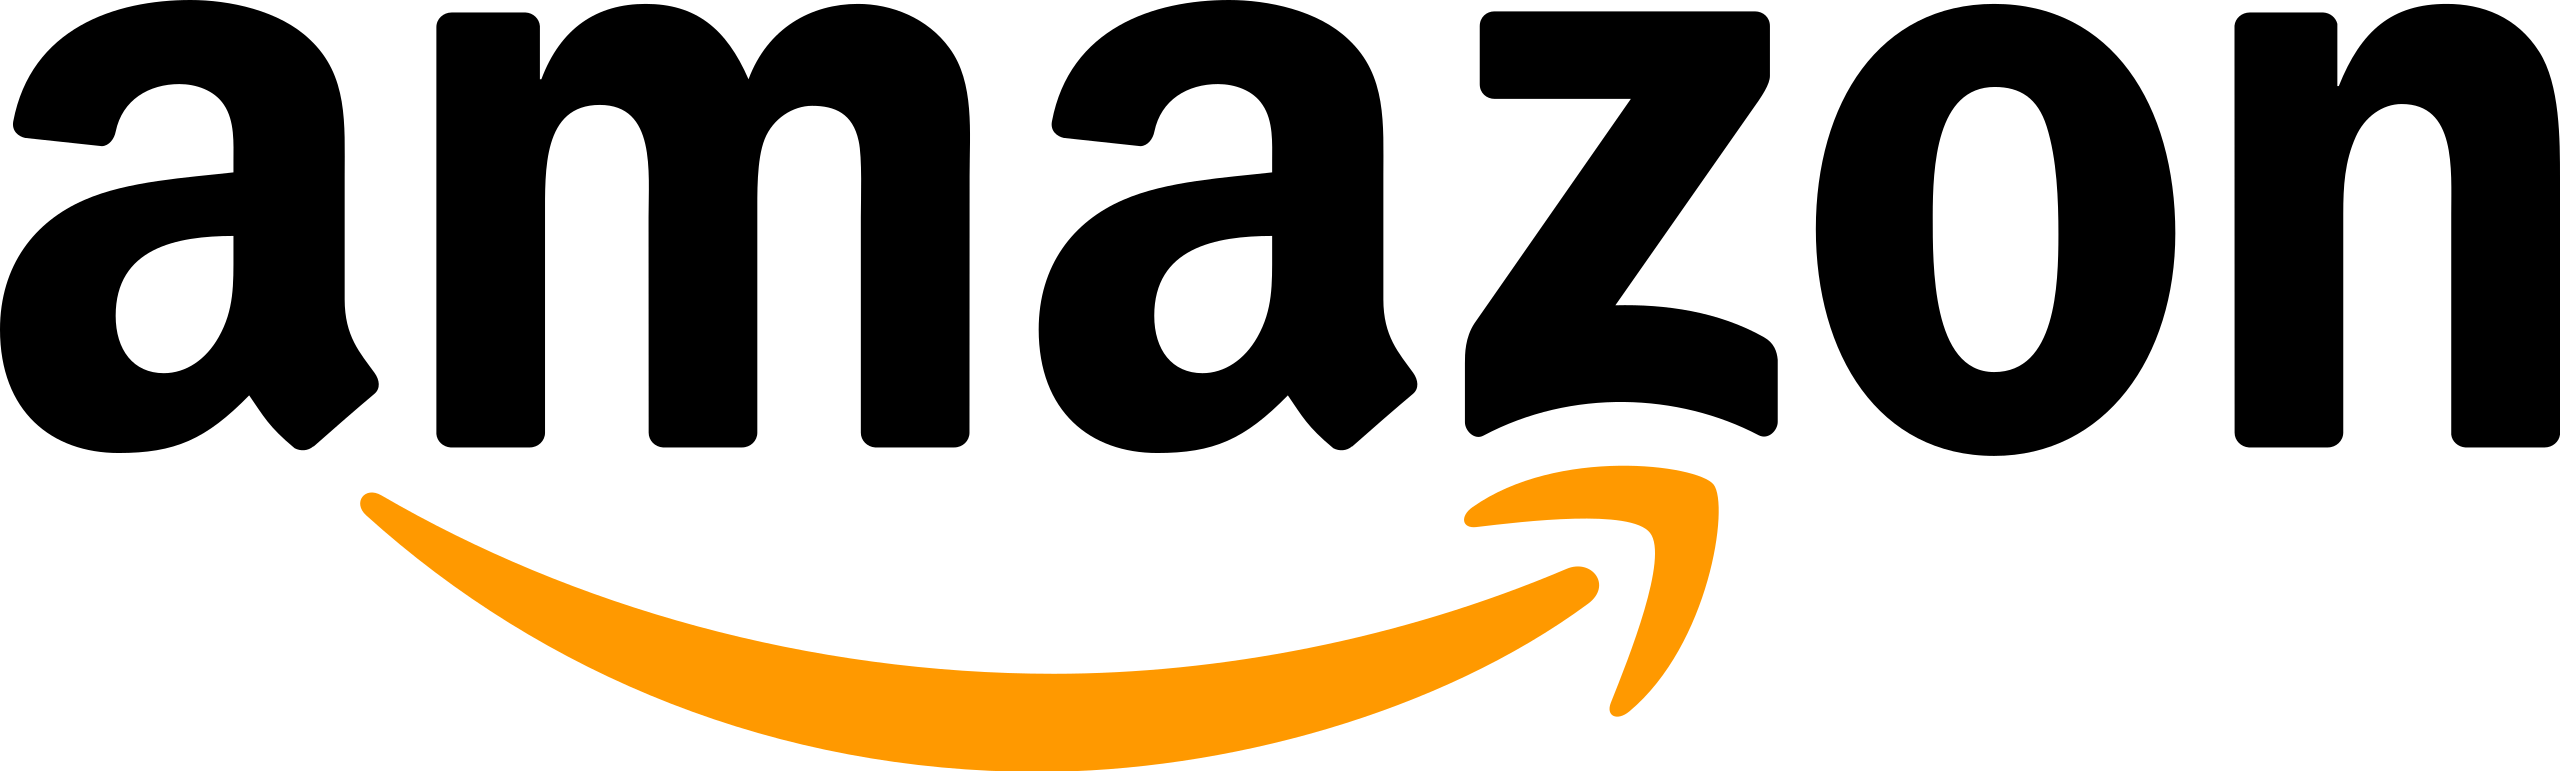 Amazon India launches anotherdelivery stationin Ahmedabad ahead of the festive season